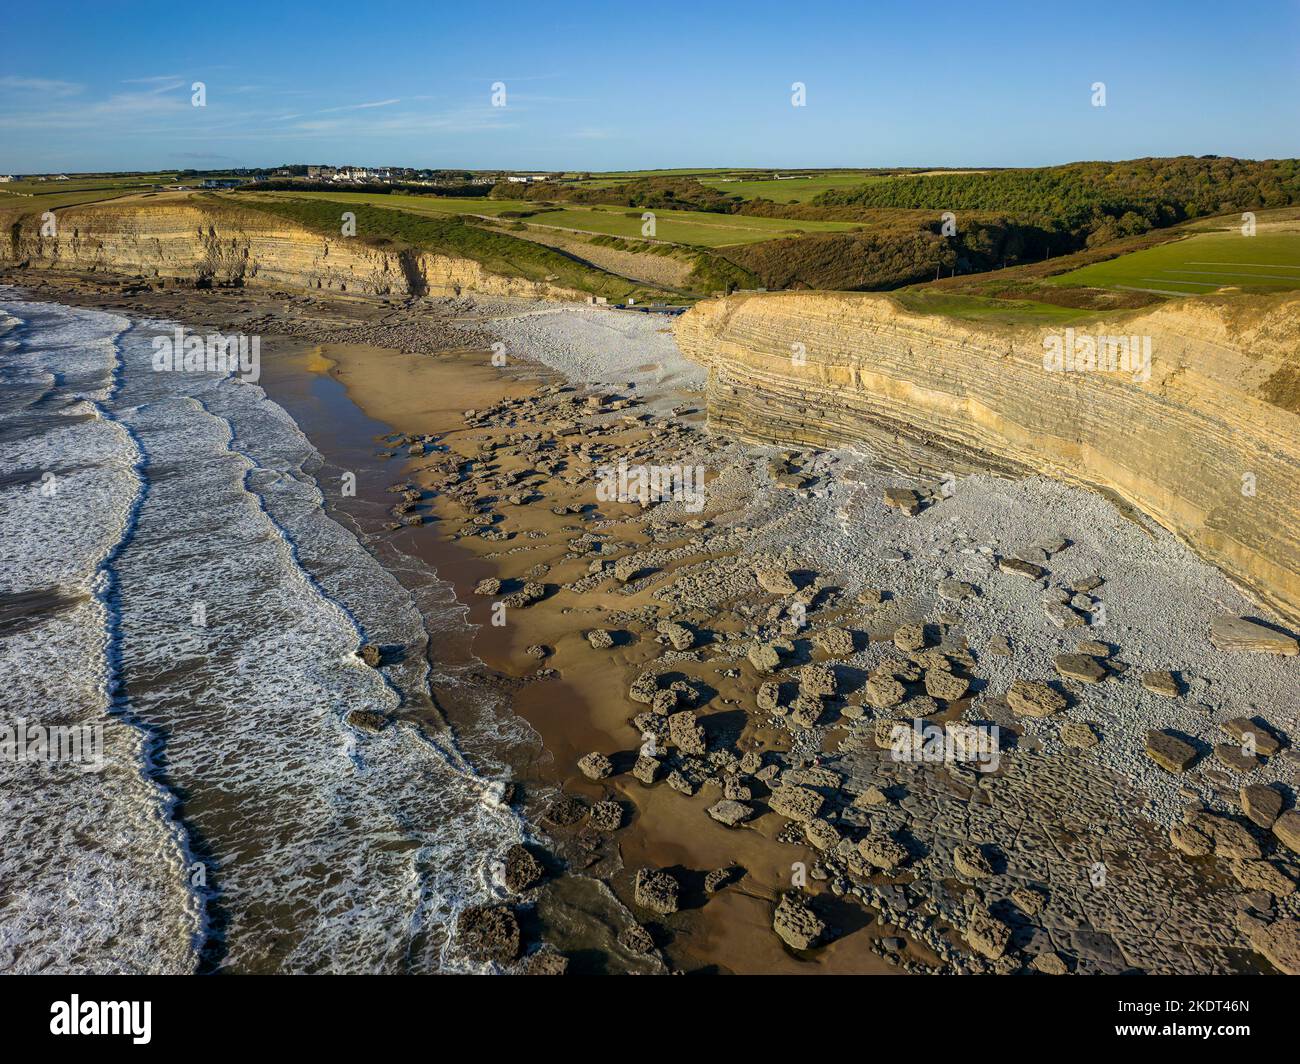 Aerial view of limestone cliffs and a rock covered sandy beach Stock Photo